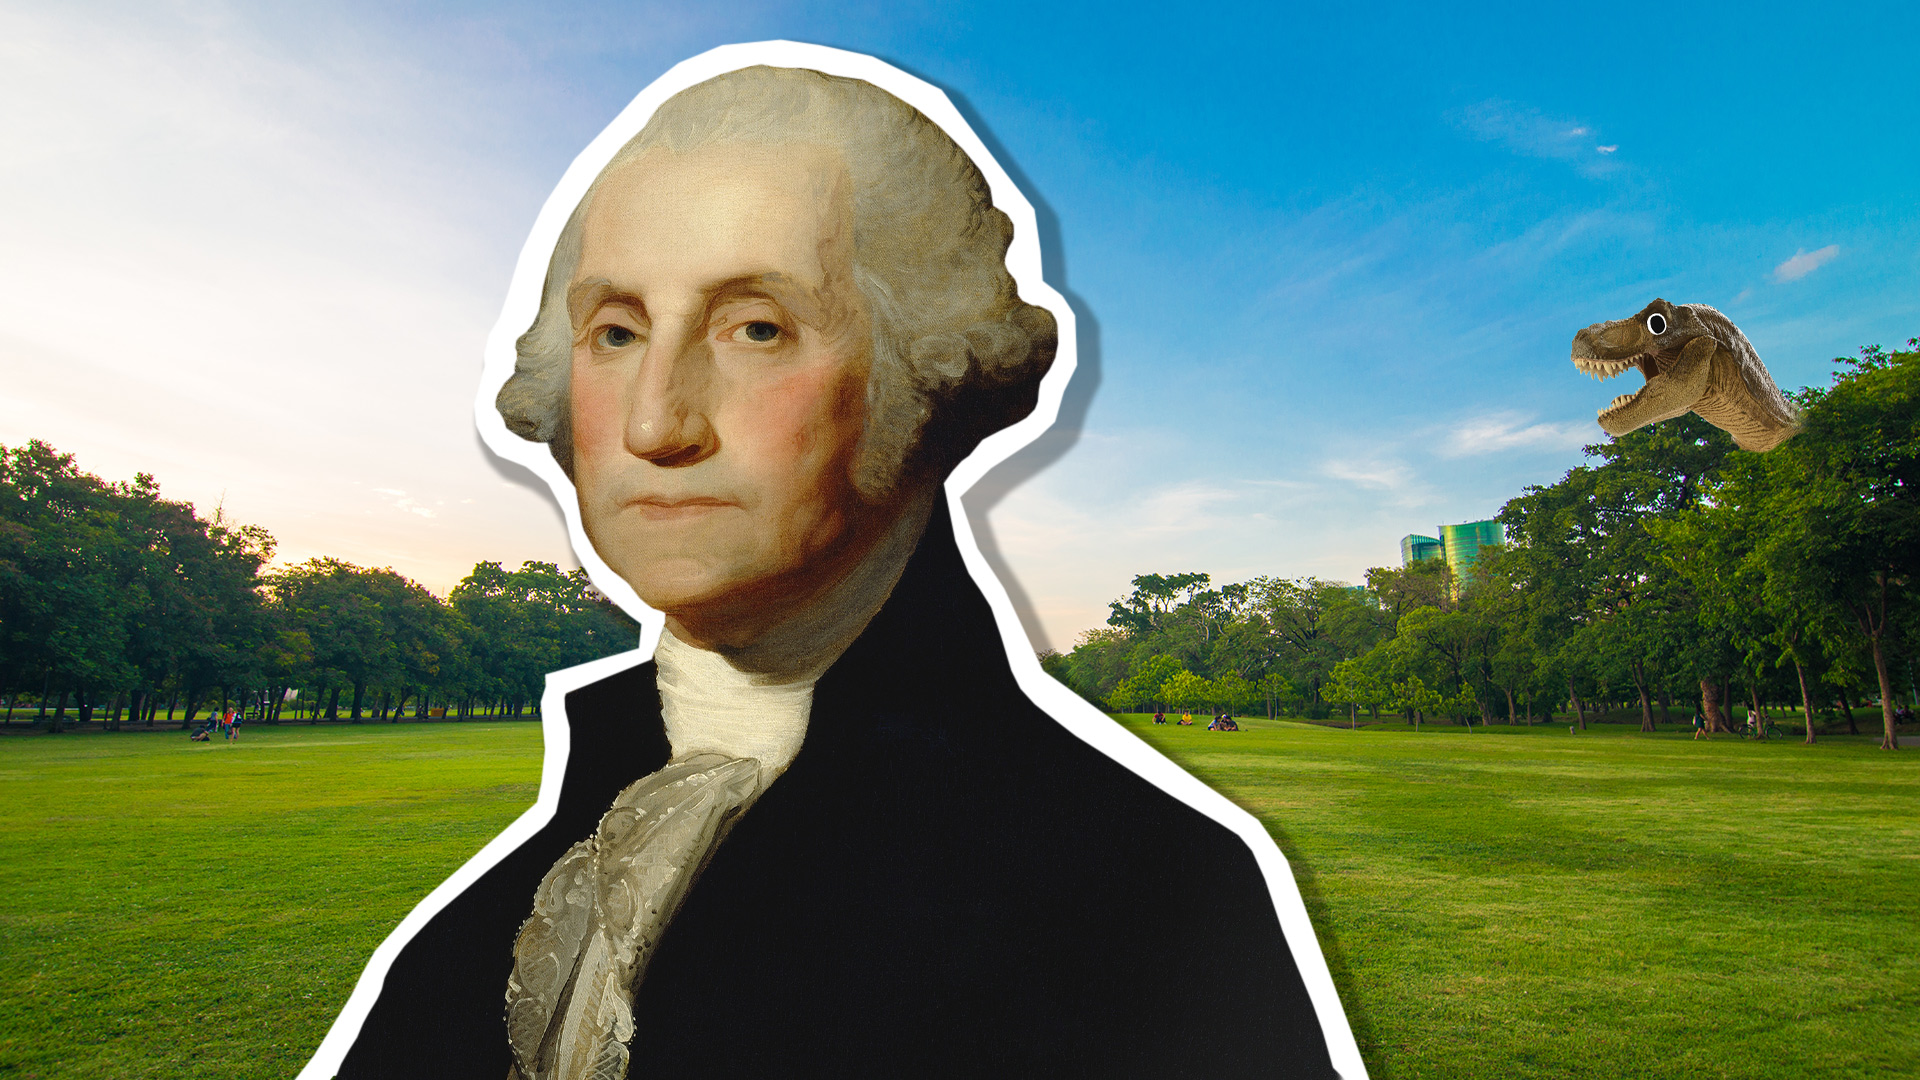 George Washington in a park with a dinosaur hiding in the trees